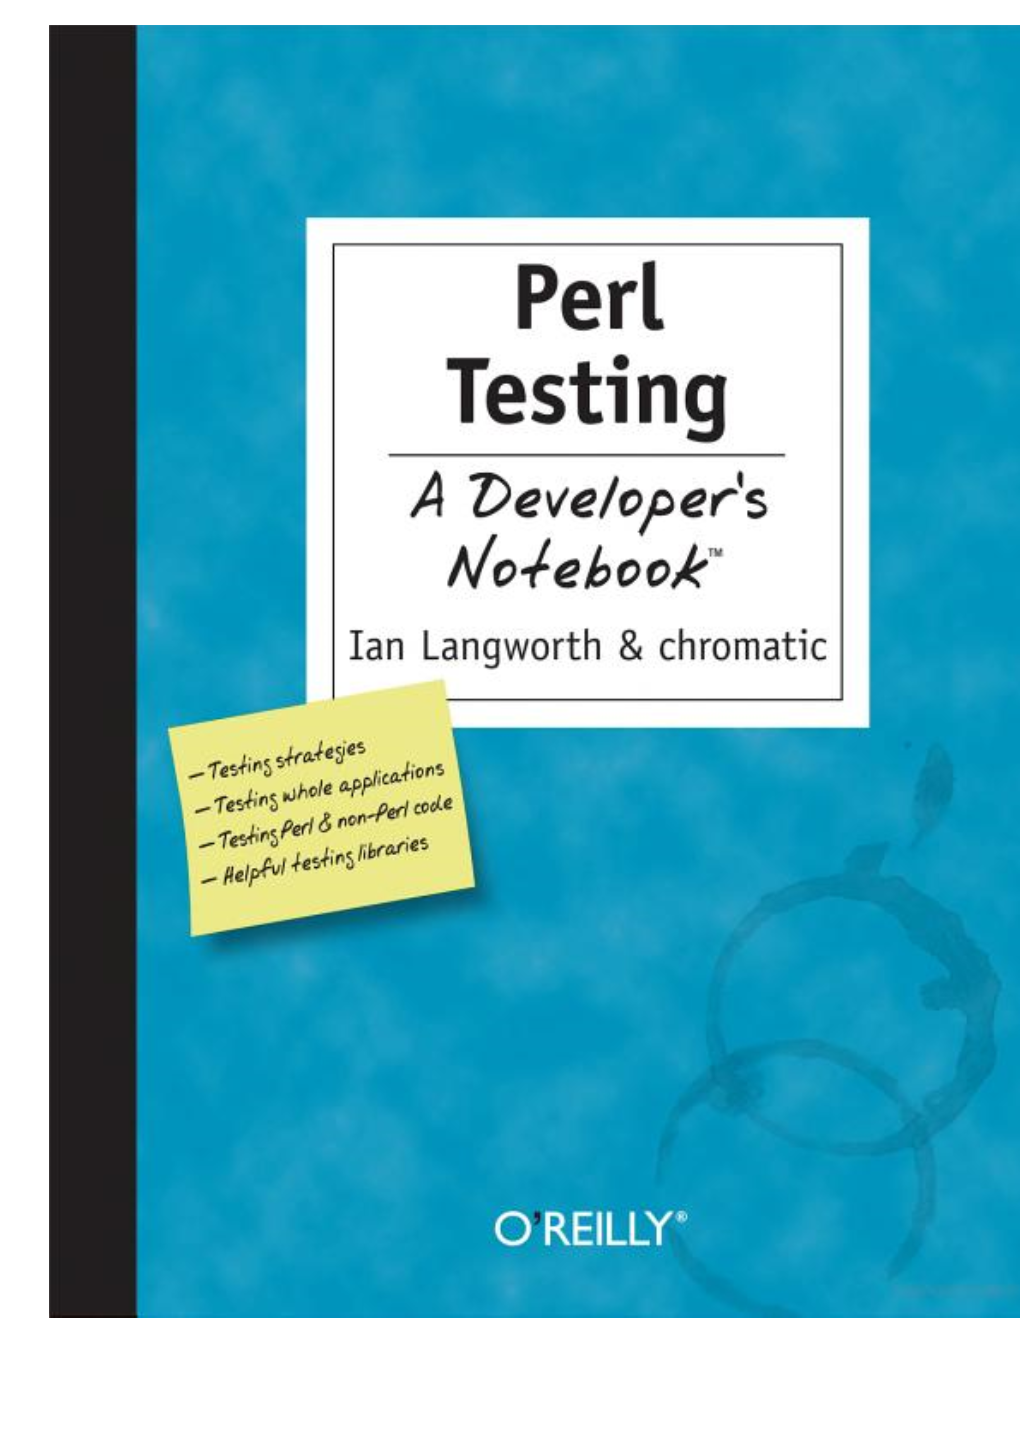 Perl Testing: a Developer's Notebook, Ian Langworth, Chromatic, O'reilly Media, Inc., 2005, 1449313086, 9781449313081, 202 Pages